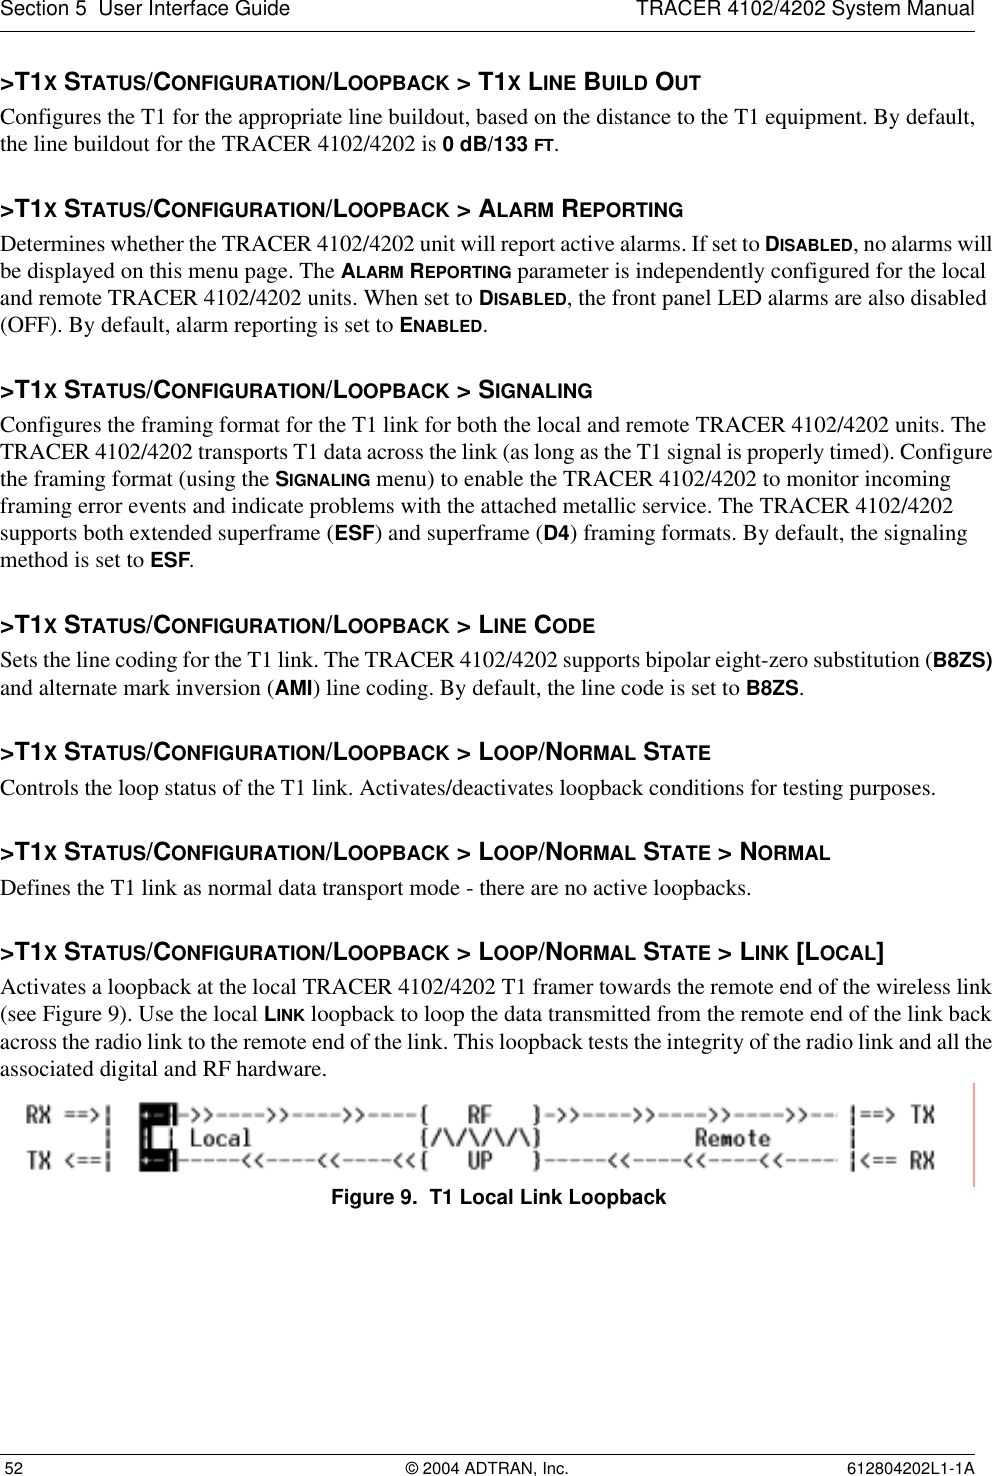 Section 5  User Interface Guide TRACER 4102/4202 System Manual 52 © 2004 ADTRAN, Inc. 612804202L1-1A&gt;T1X STATUS/CONFIGURATION/LOOPBACK &gt; T1X LINE BUILD OUTConfigures the T1 for the appropriate line buildout, based on the distance to the T1 equipment. By default, the line buildout for the TRACER 4102/4202 is 0 dB/133 FT.&gt;T1X STATUS/CONFIGURATION/LOOPBACK &gt; ALARM REPORTINGDetermines whether the TRACER 4102/4202 unit will report active alarms. If set to DISABLED, no alarms will be displayed on this menu page. The ALARM REPORTING parameter is independently configured for the local and remote TRACER 4102/4202 units. When set to DISABLED, the front panel LED alarms are also disabled (OFF). By default, alarm reporting is set to ENABLED.&gt;T1X STATUS/CONFIGURATION/LOOPBACK &gt; SIGNALINGConfigures the framing format for the T1 link for both the local and remote TRACER 4102/4202 units. The TRACER 4102/4202 transports T1 data across the link (as long as the T1 signal is properly timed). Configure the framing format (using the SIGNALING menu) to enable the TRACER 4102/4202 to monitor incoming framing error events and indicate problems with the attached metallic service. The TRACER 4102/4202 supports both extended superframe (ESF) and superframe (D4) framing formats. By default, the signaling method is set to ESF.&gt;T1X STATUS/CONFIGURATION/LOOPBACK &gt; LINE CODESets the line coding for the T1 link. The TRACER 4102/4202 supports bipolar eight-zero substitution (B8ZS) and alternate mark inversion (AMI) line coding. By default, the line code is set to B8ZS.&gt;T1X STATUS/CONFIGURATION/LOOPBACK &gt; LOOP/NORMAL STATEControls the loop status of the T1 link. Activates/deactivates loopback conditions for testing purposes.&gt;T1X STATUS/CONFIGURATION/LOOPBACK &gt; LOOP/NORMAL STATE &gt; NORMALDefines the T1 link as normal data transport mode - there are no active loopbacks.&gt;T1X STATUS/CONFIGURATION/LOOPBACK &gt; LOOP/NORMAL STATE &gt; LINK [LOCAL]Activates a loopback at the local TRACER 4102/4202 T1 framer towards the remote end of the wireless link (see Figure 9). Use the local LINK loopback to loop the data transmitted from the remote end of the link back across the radio link to the remote end of the link. This loopback tests the integrity of the radio link and all the associated digital and RF hardware.Figure 9.  T1 Local Link Loopback